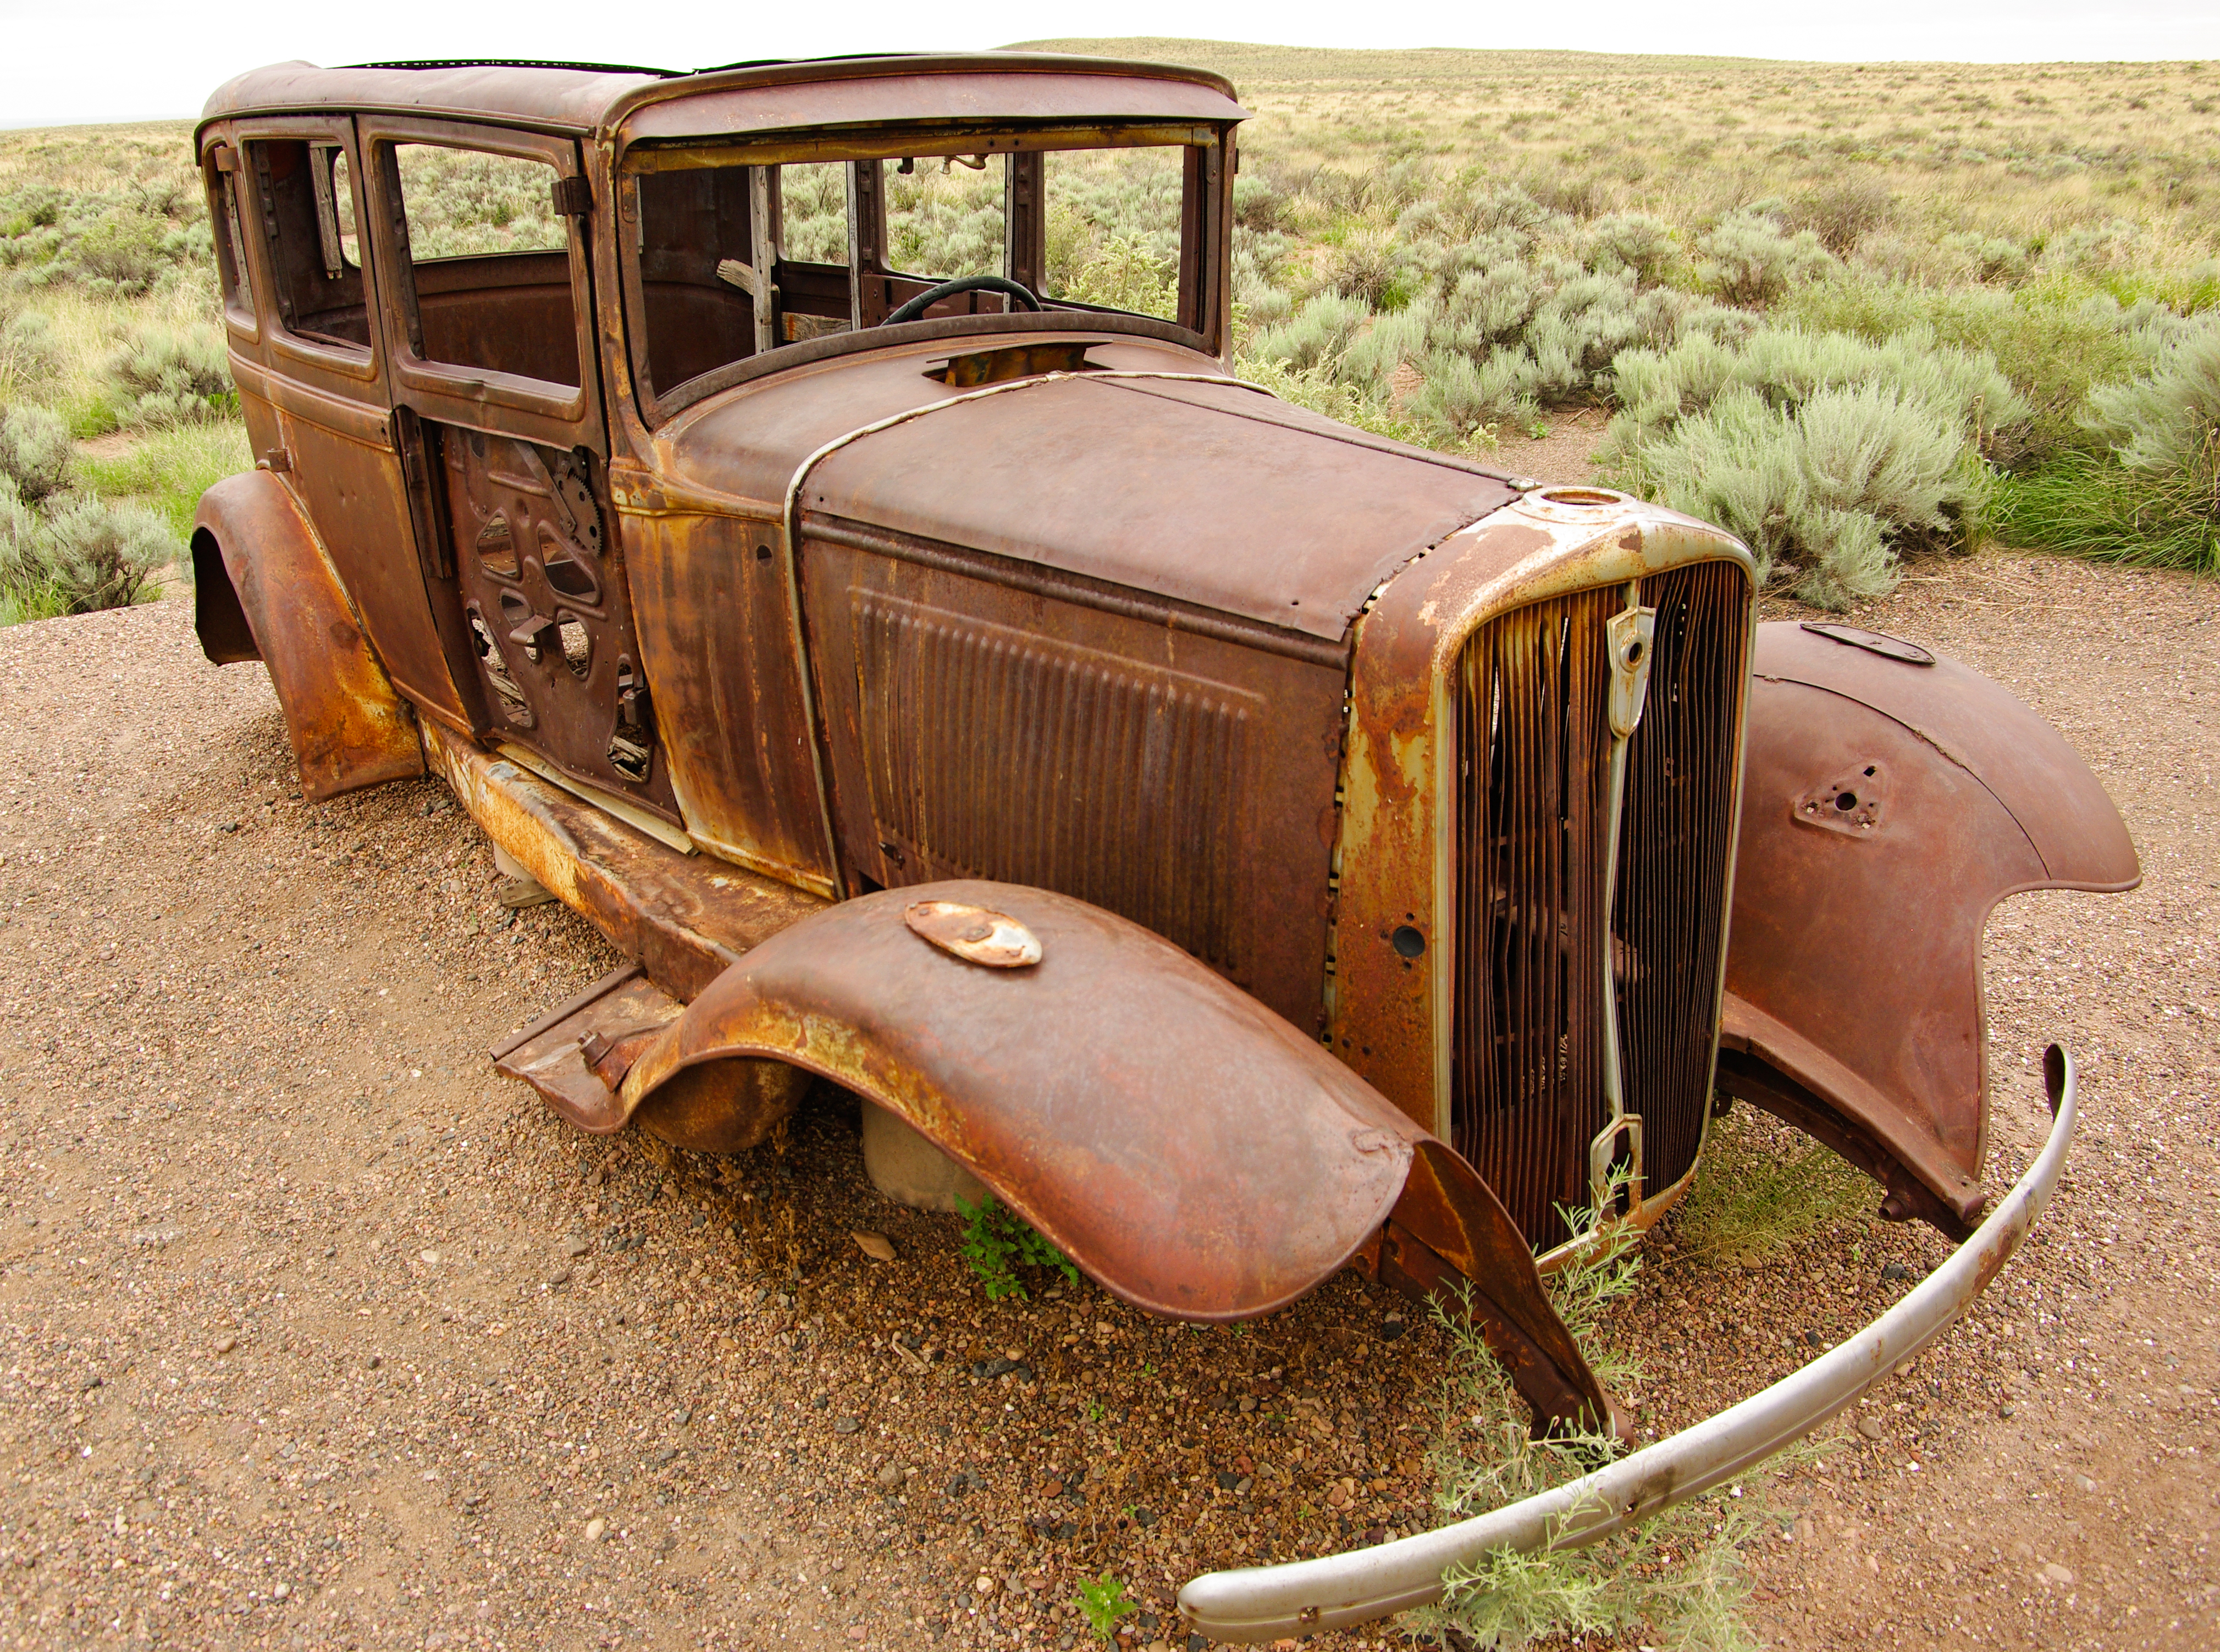 An old 1932 Studebaker auto sits near the Route 66 alignment